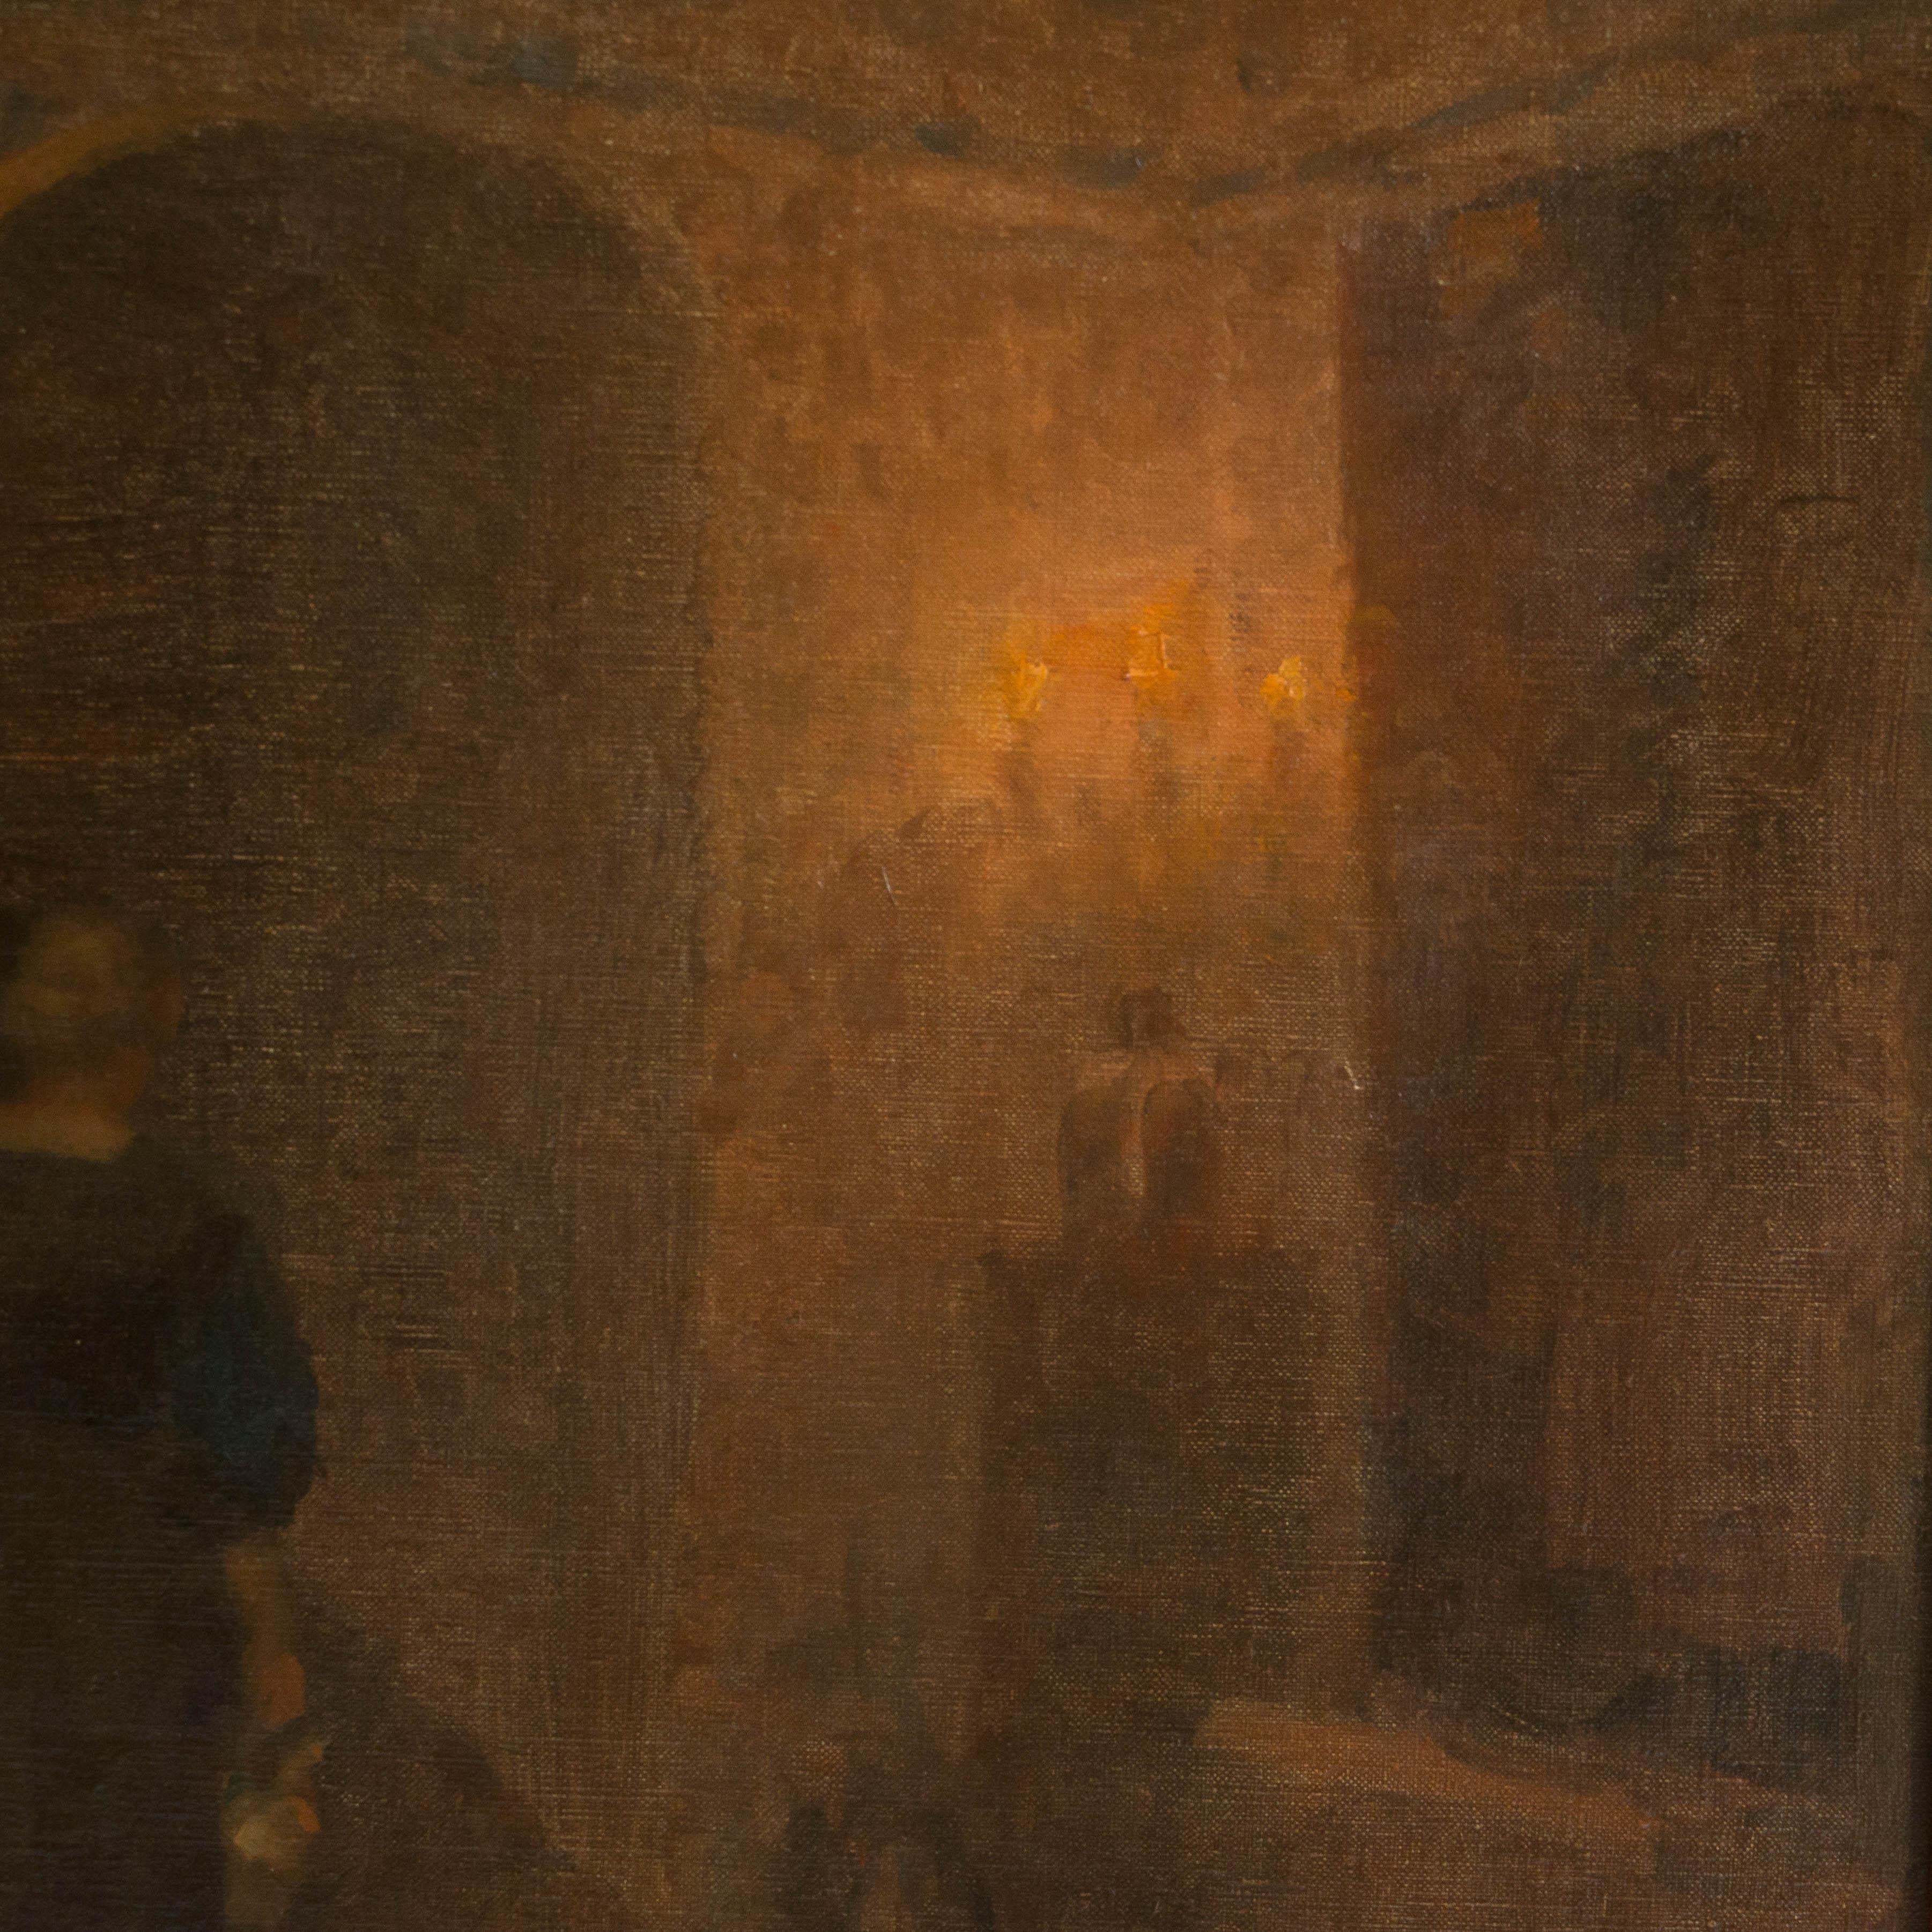 Original oil on canvas genre painting of woman in long period dress walking through a dimly lit interior corridor with the soft glow of candlelight in the corner. The painting is mounted in a giltwood and gesso frame and is signed illegibly, in the